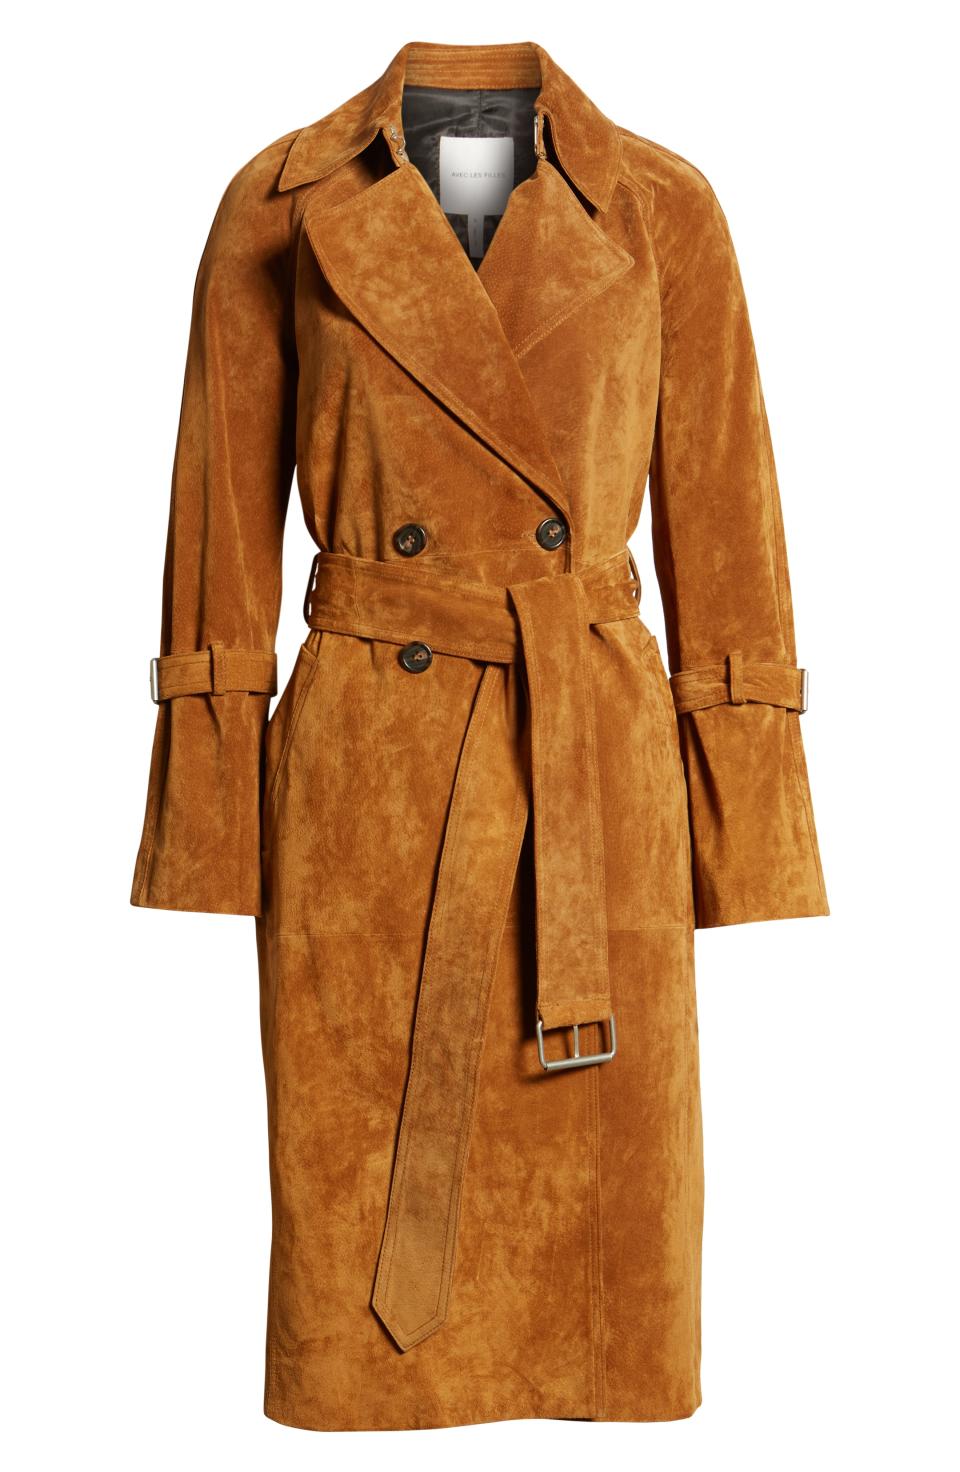 Genuine Suede Trench Coat